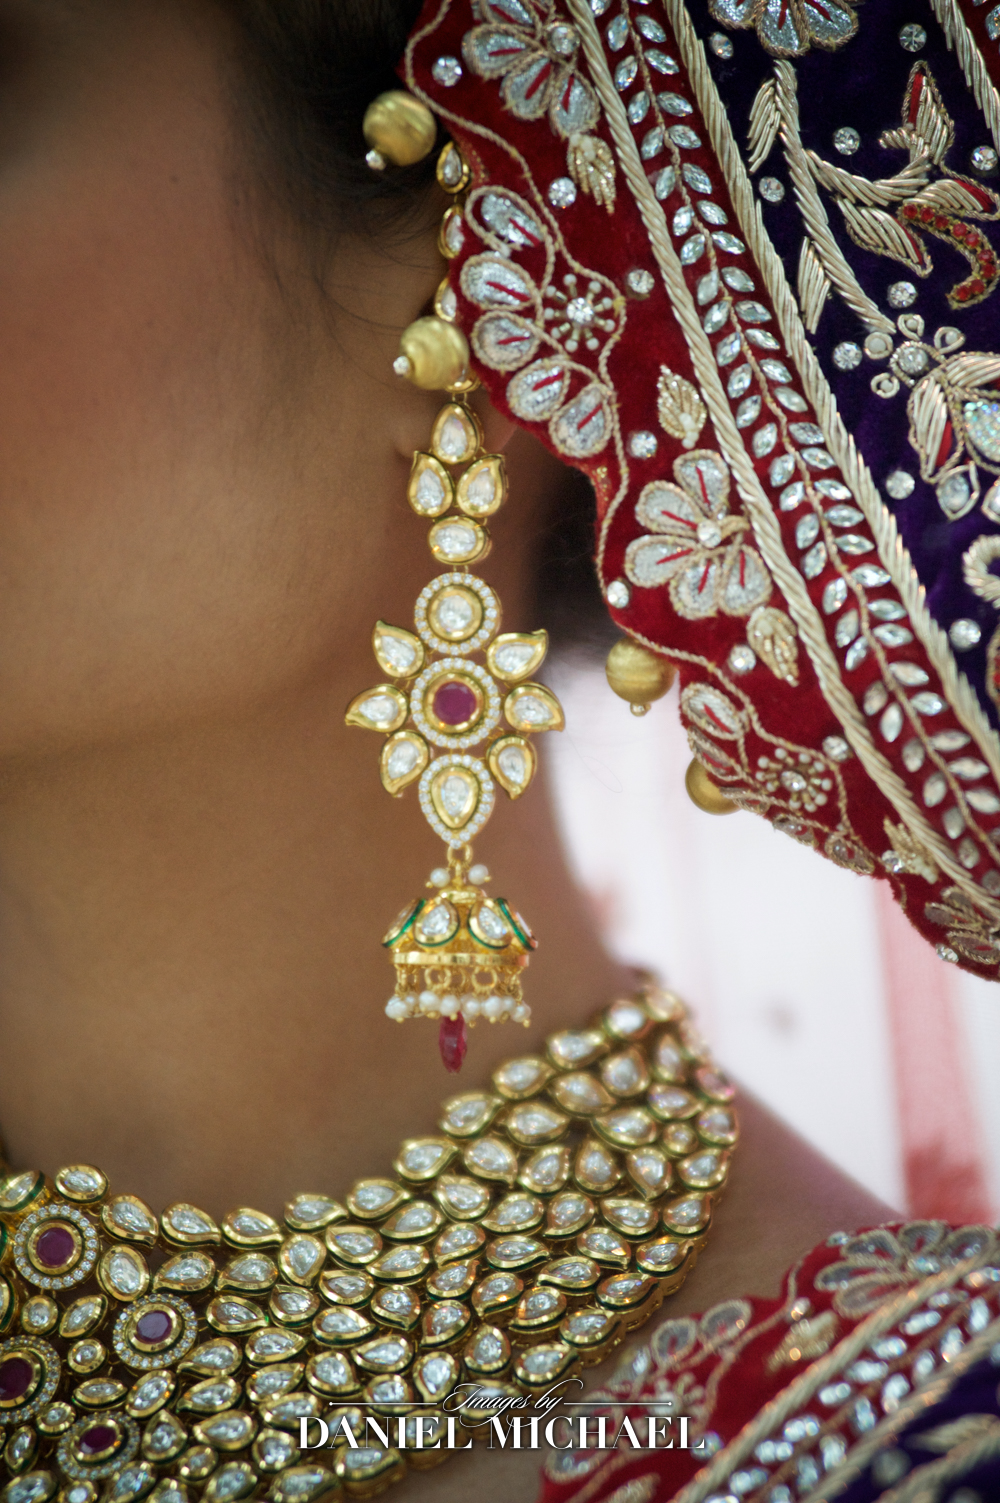 Close-up of exquisite South Asian wedding earrings, necklace, and headpiece